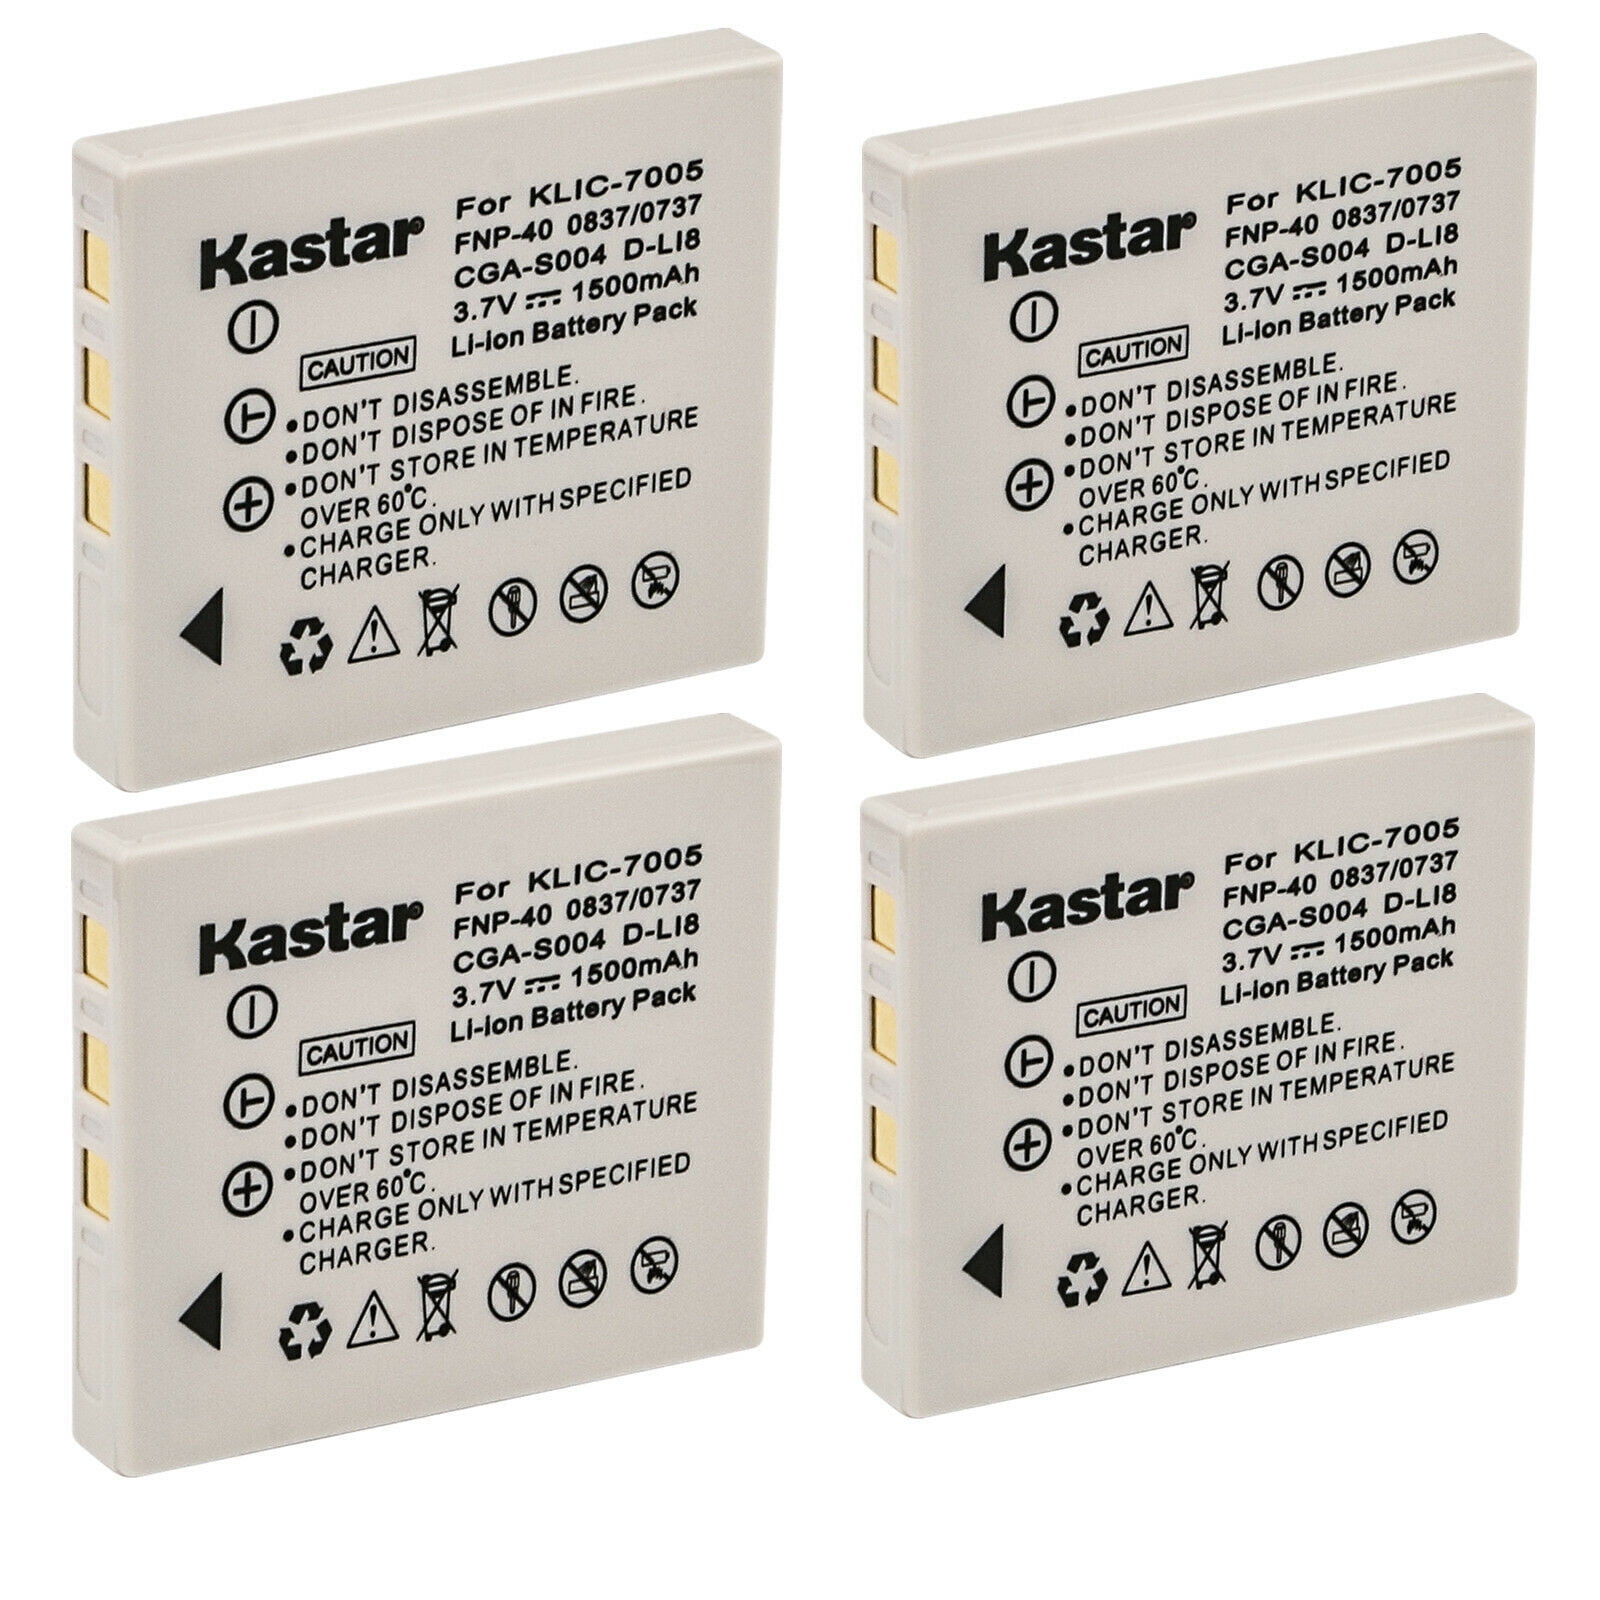 Kastar 2-Pack Battery and AC Wall Charger Replacement for Pentax D-Li8 D-Li85 Battery Optio A36 Pentax D-BC8 Charger Optio A10 Optio E65 Optio L20 Optio A40 Optio A30 Optio A20 Pentax Optio X